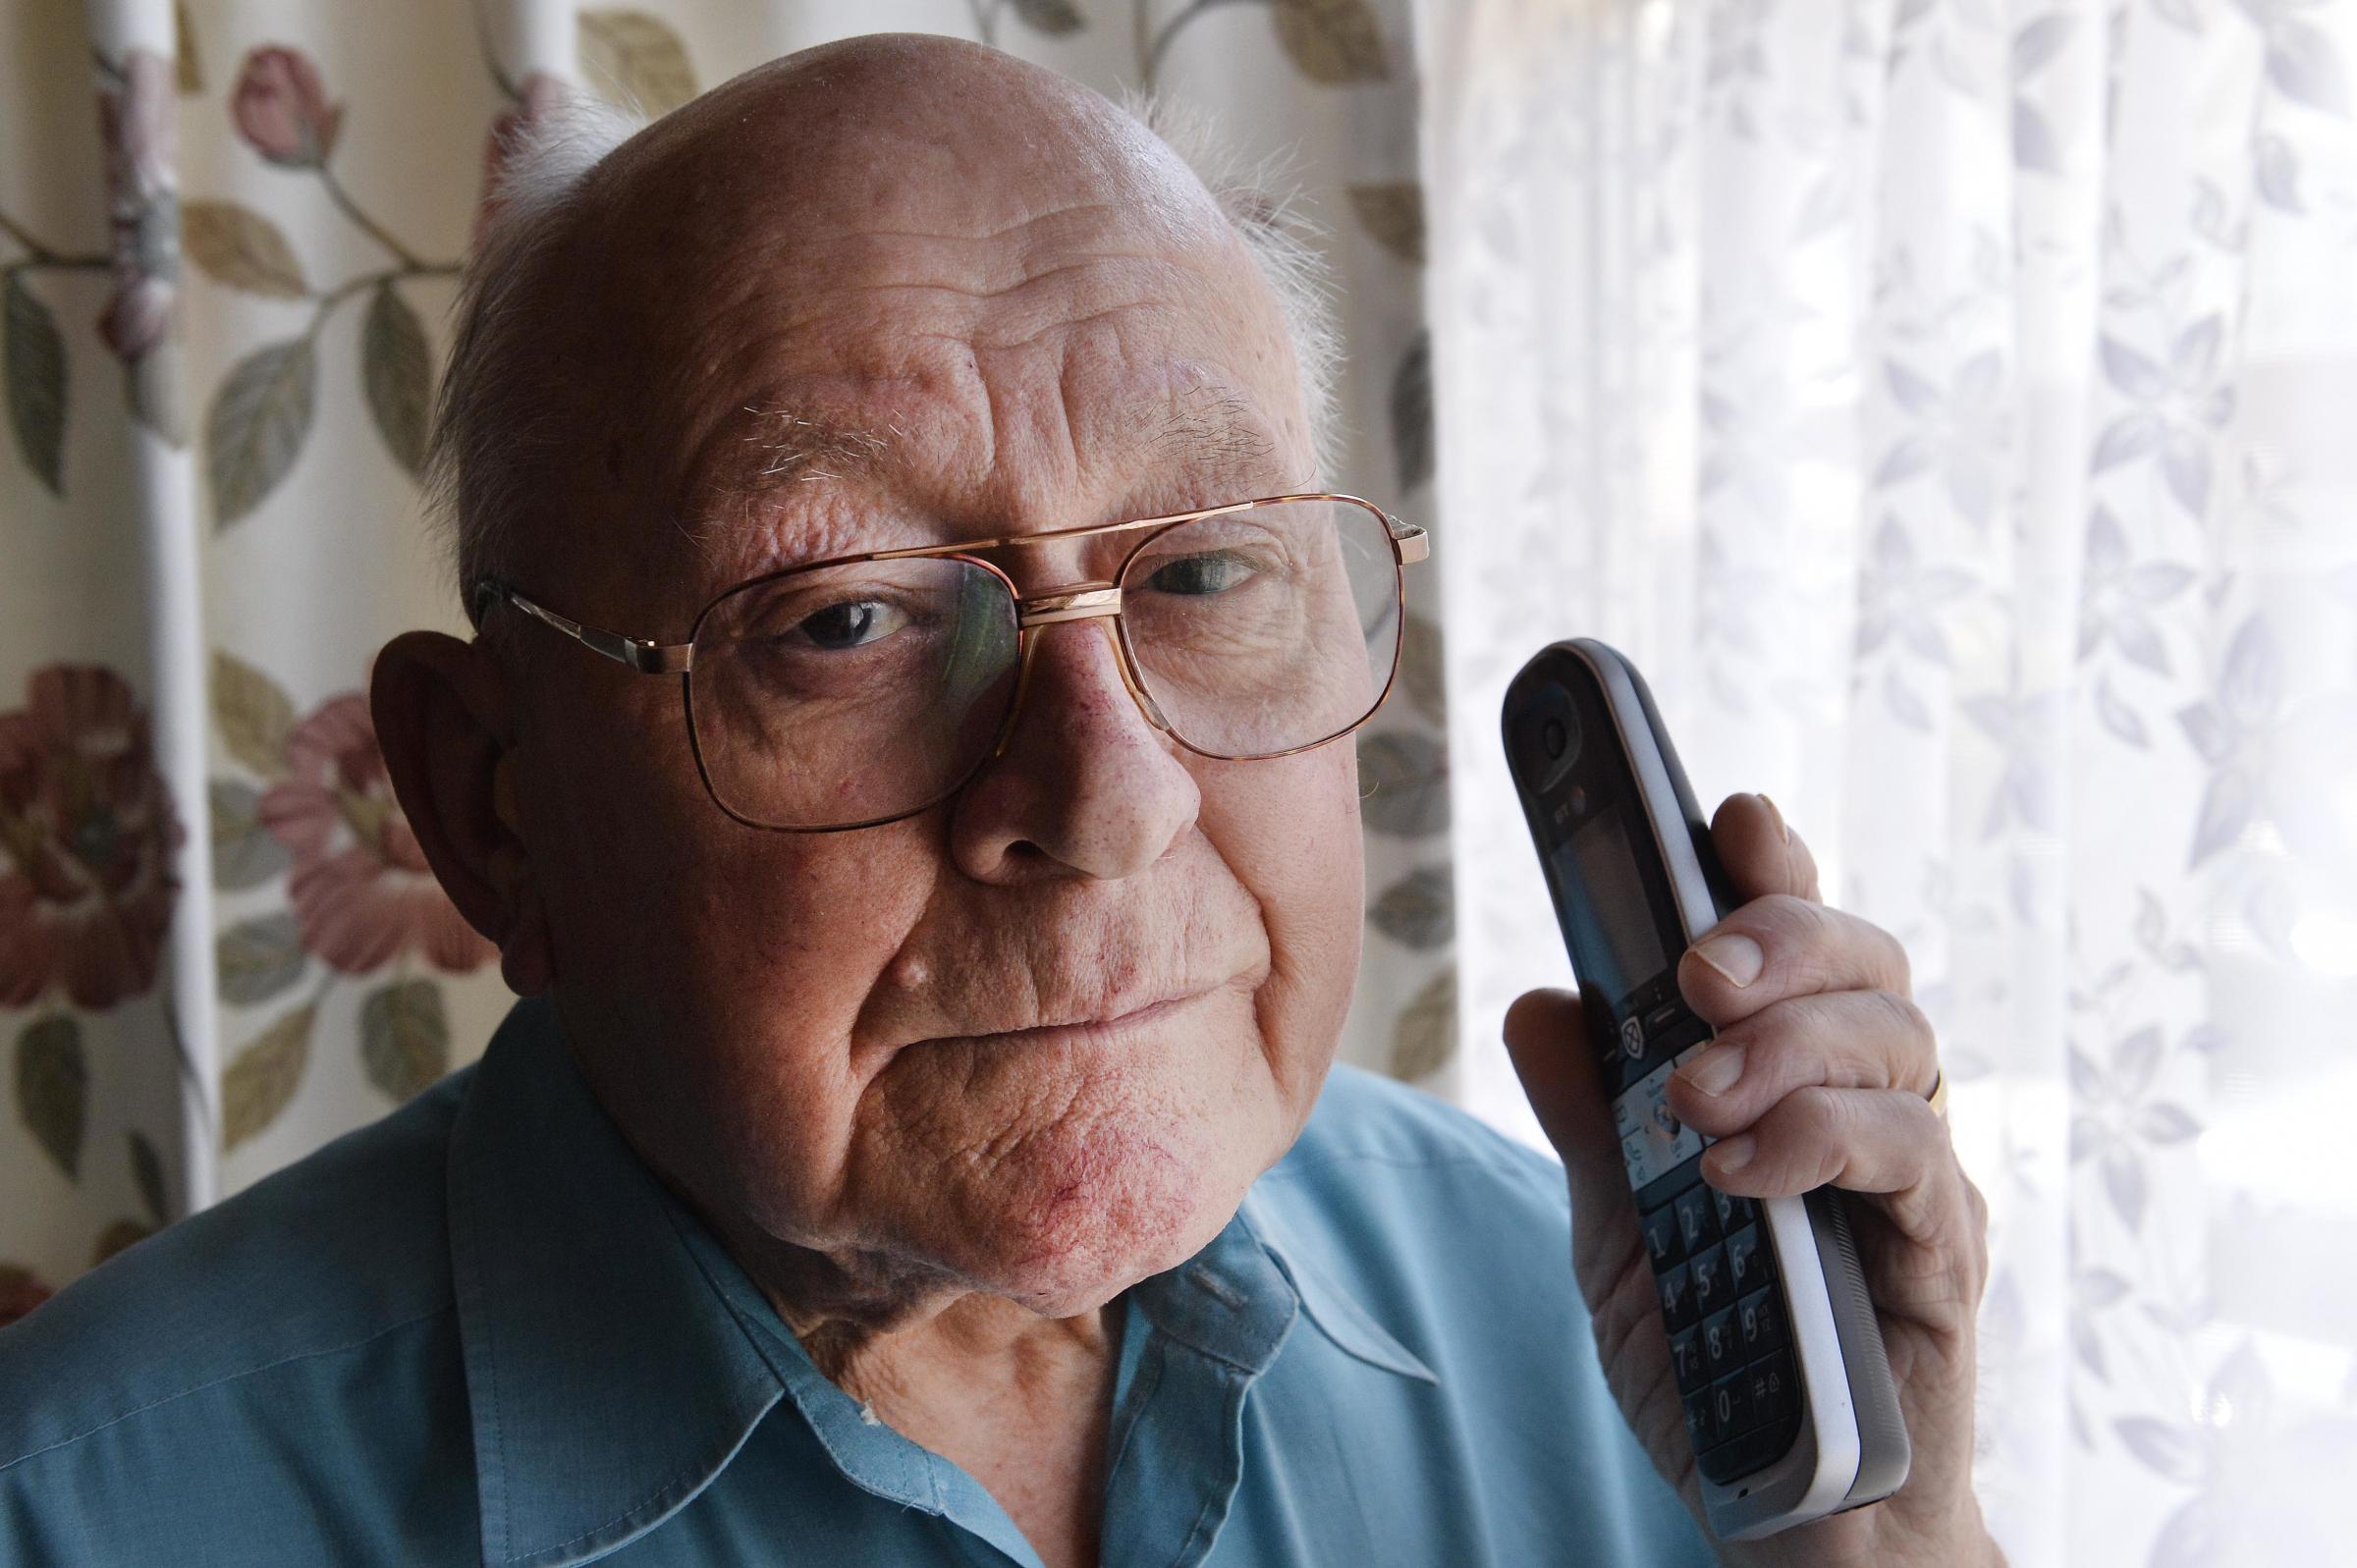 Elderly man urges others to watch for fraudsters after nearly losing his cash